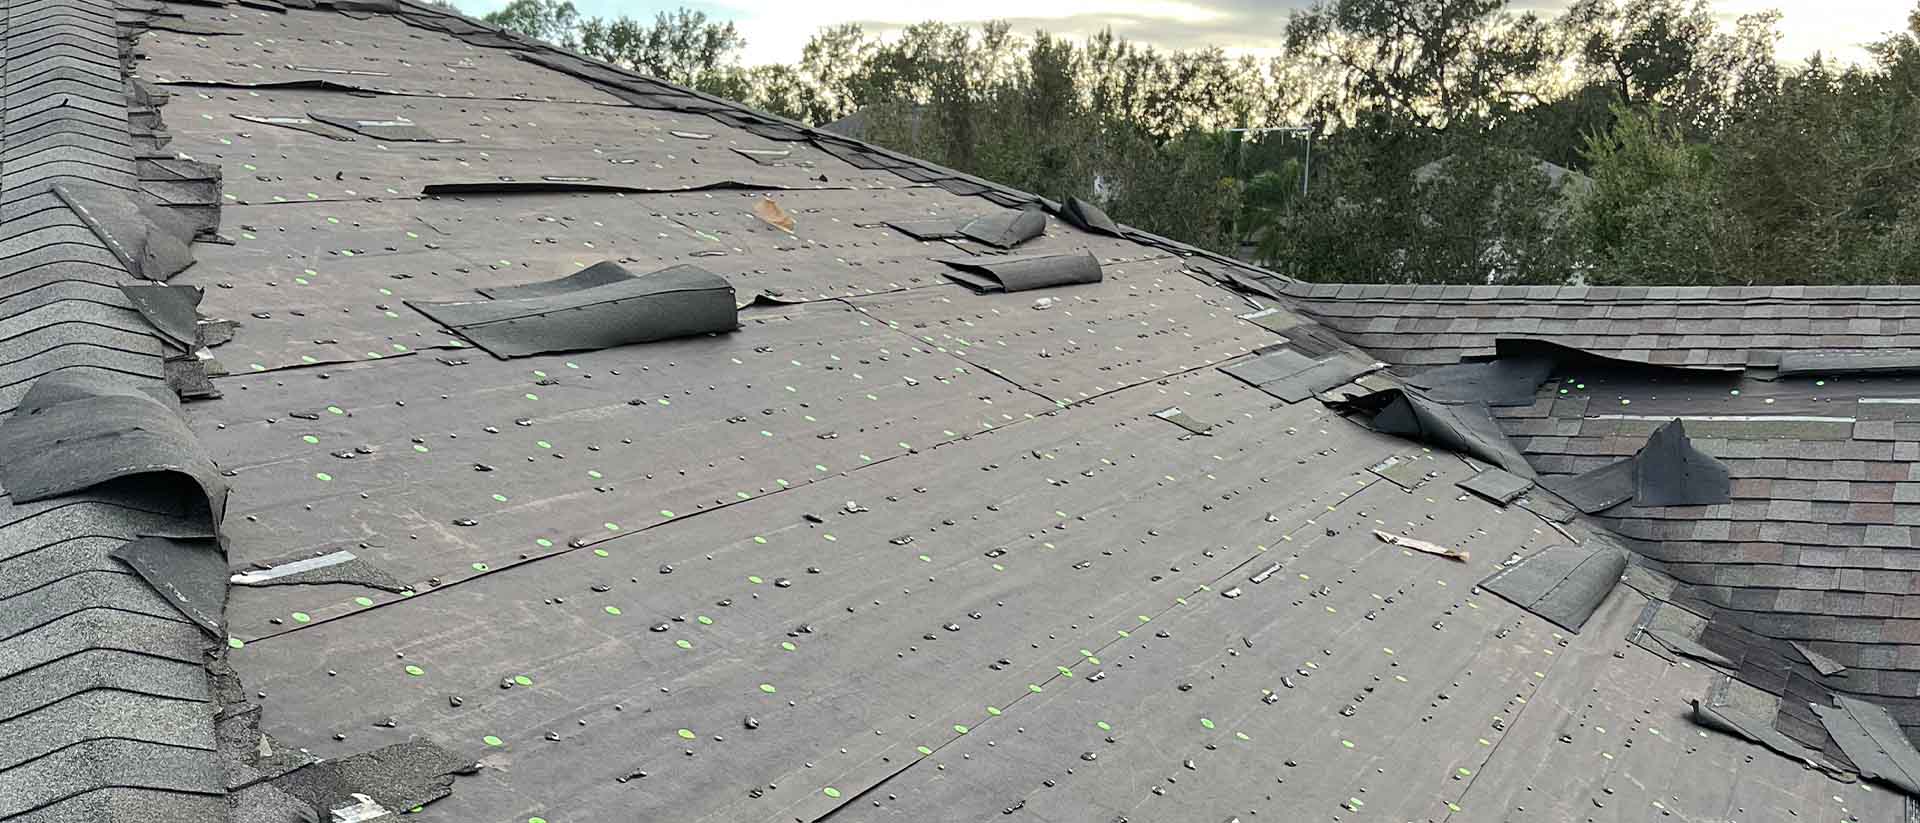 Roof shingles blown off from high winds.